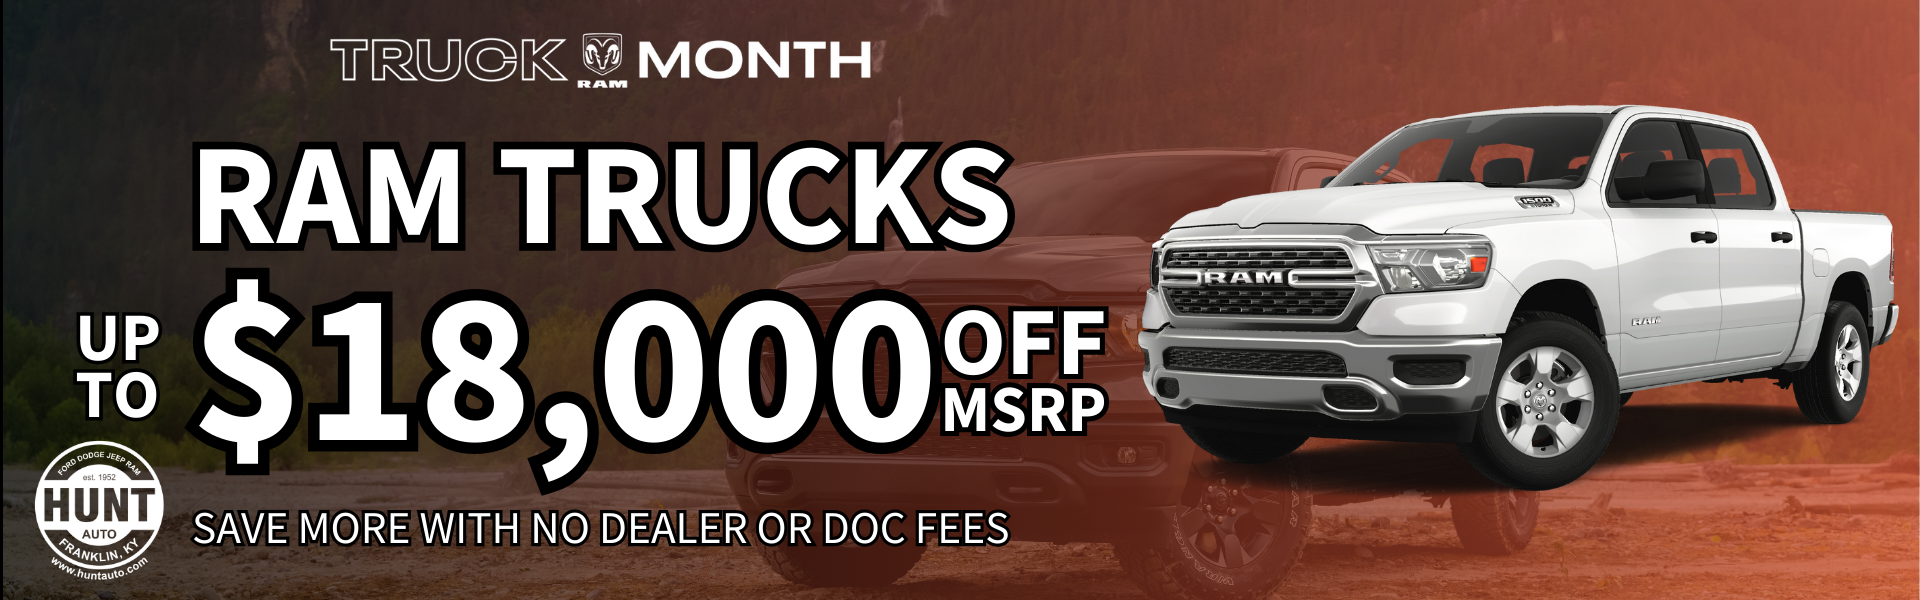 Save more with up to $15,000 OFF MSRP on Ram Trucks